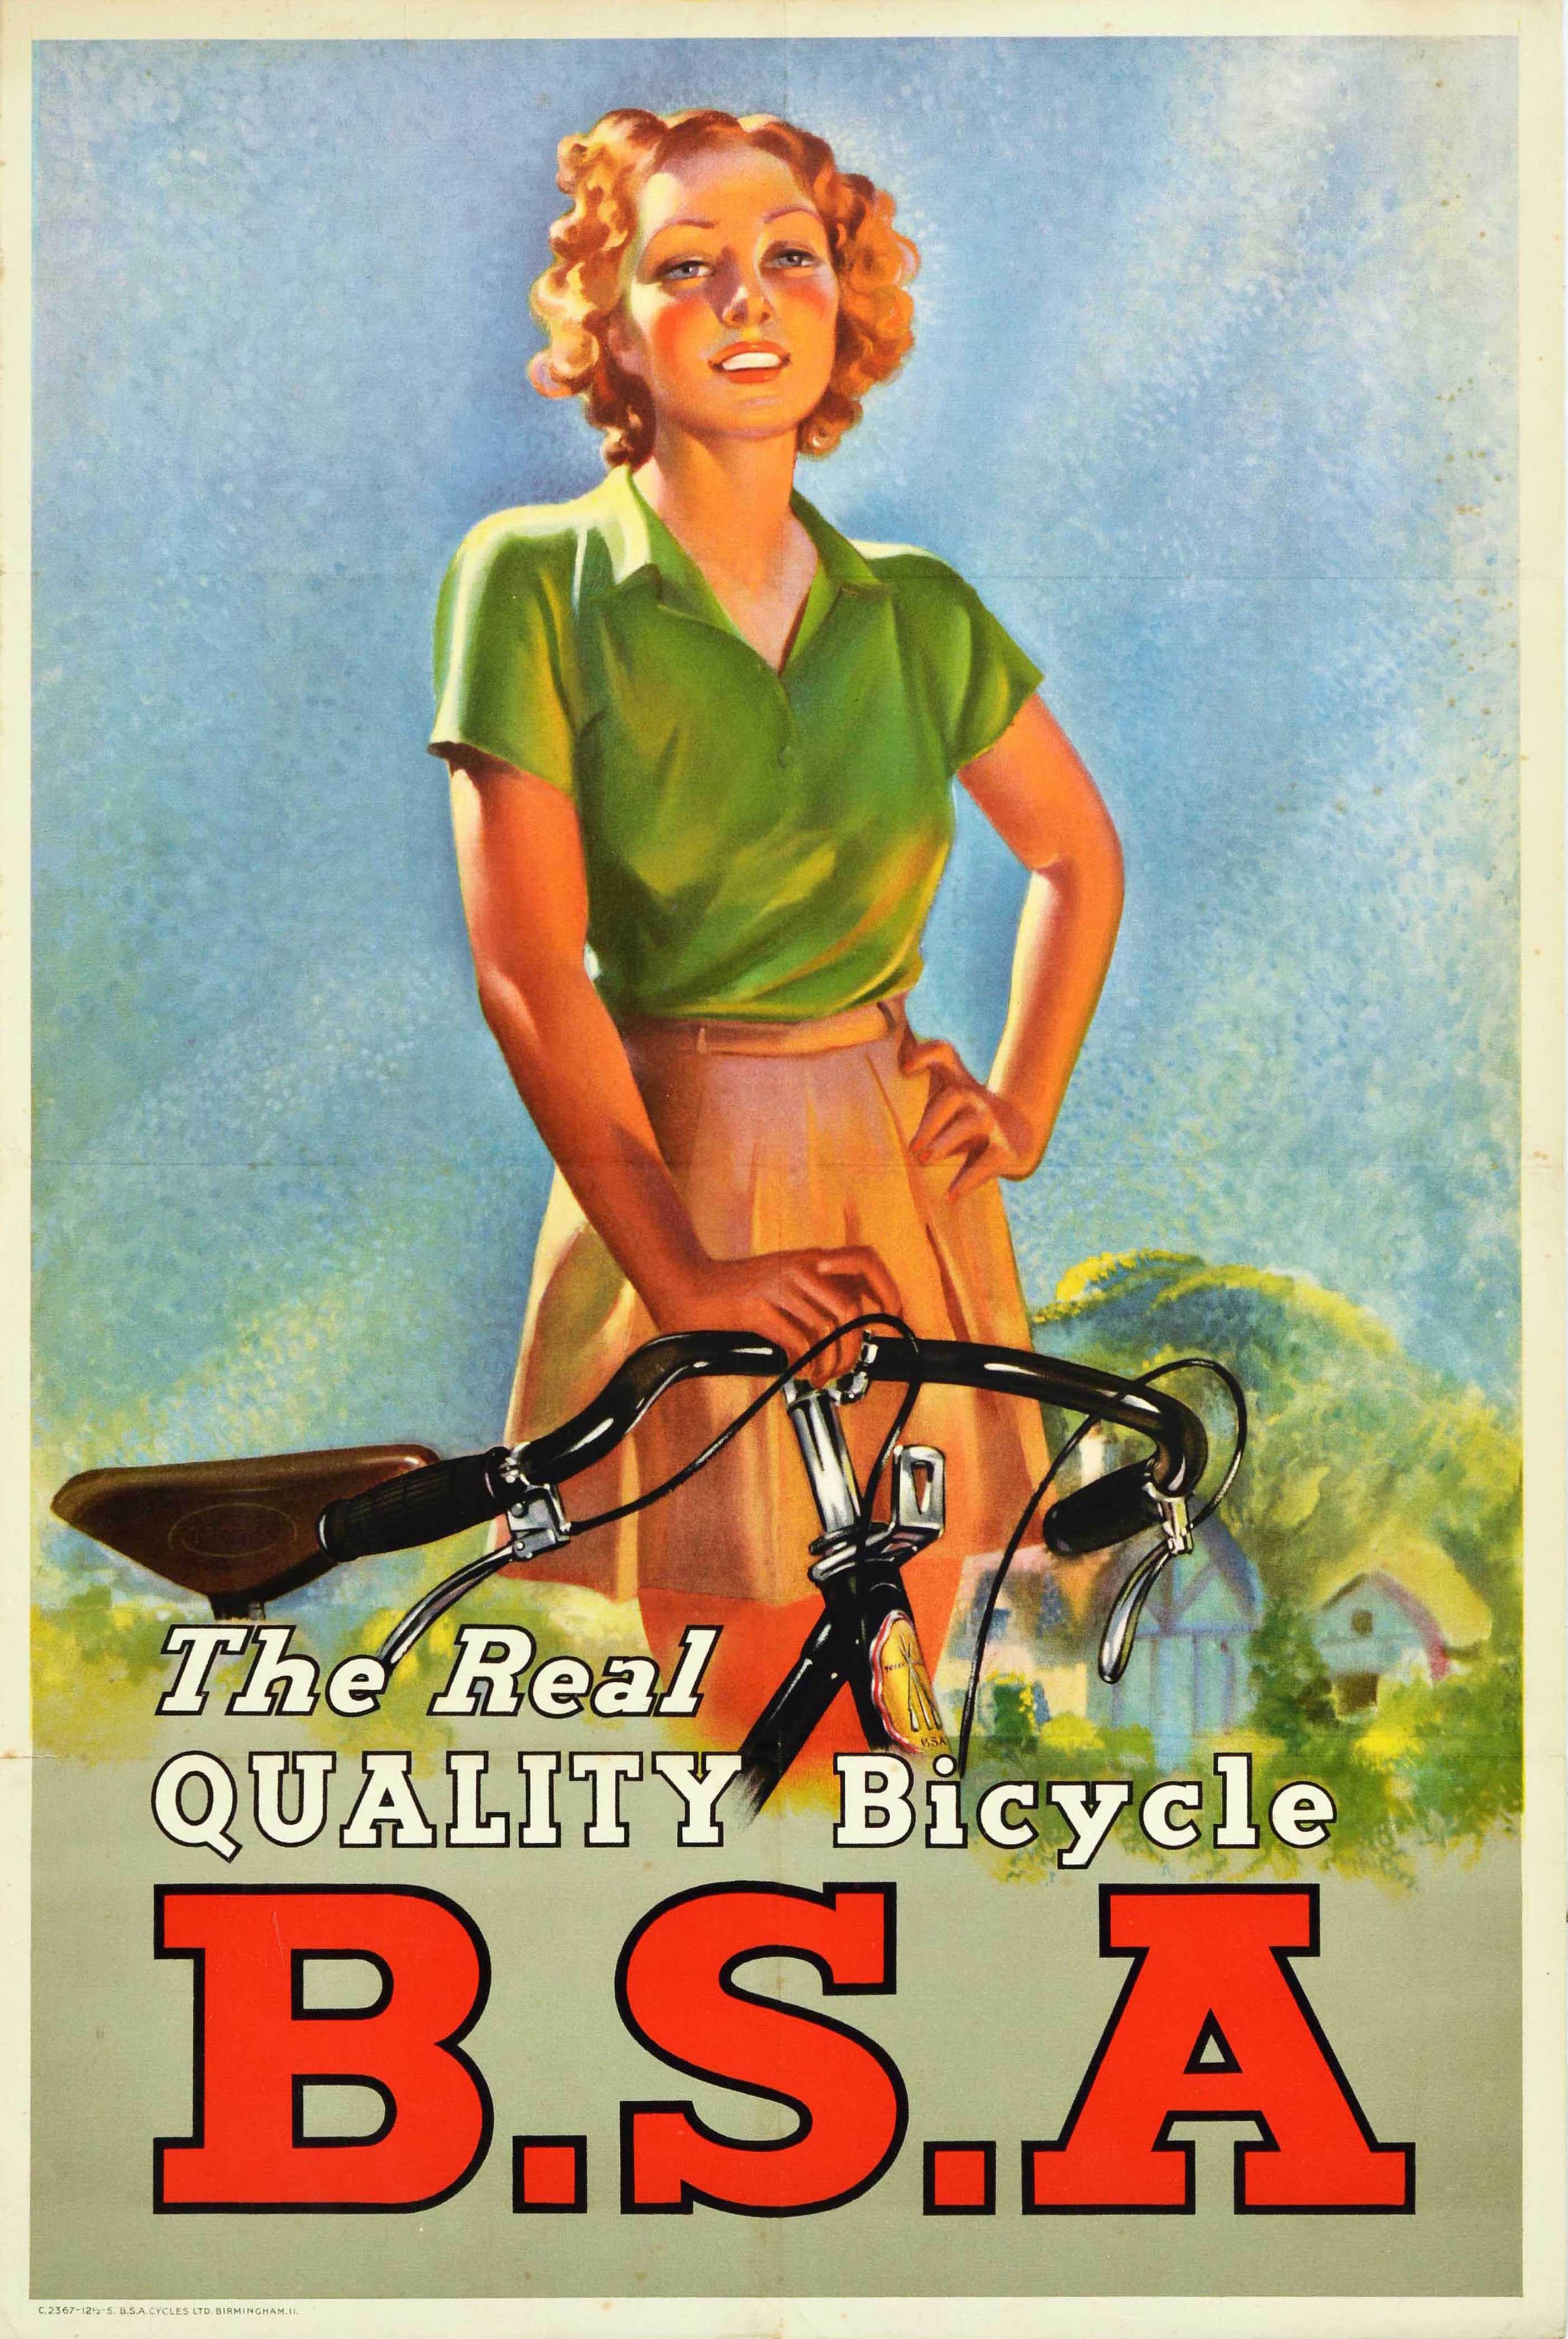 Unknown Print - Original Vintage Advertising Poster BSA The Real Quality Bicycle Design Art